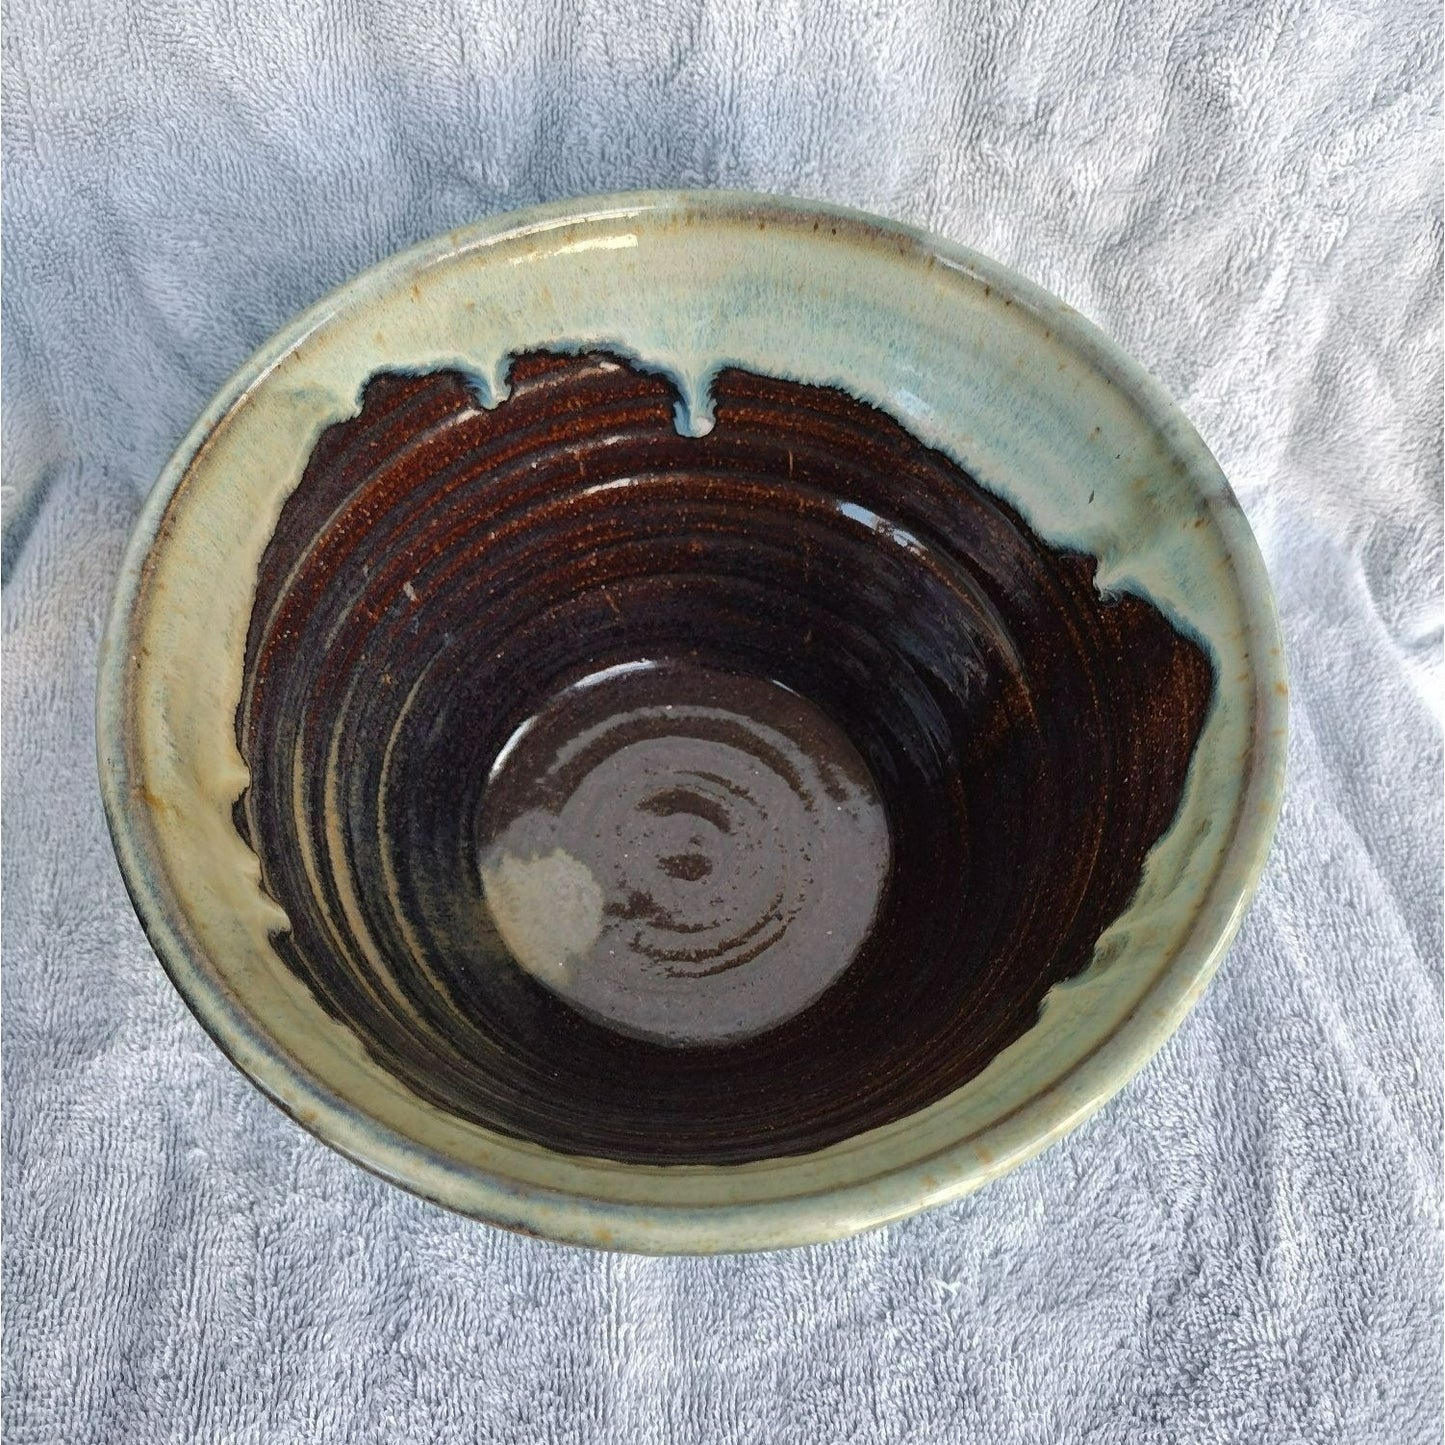 Dina Wilde-Ramsing Pottery, Large Studio Ceramic Bowl, Hand Crafted Signed 1980s